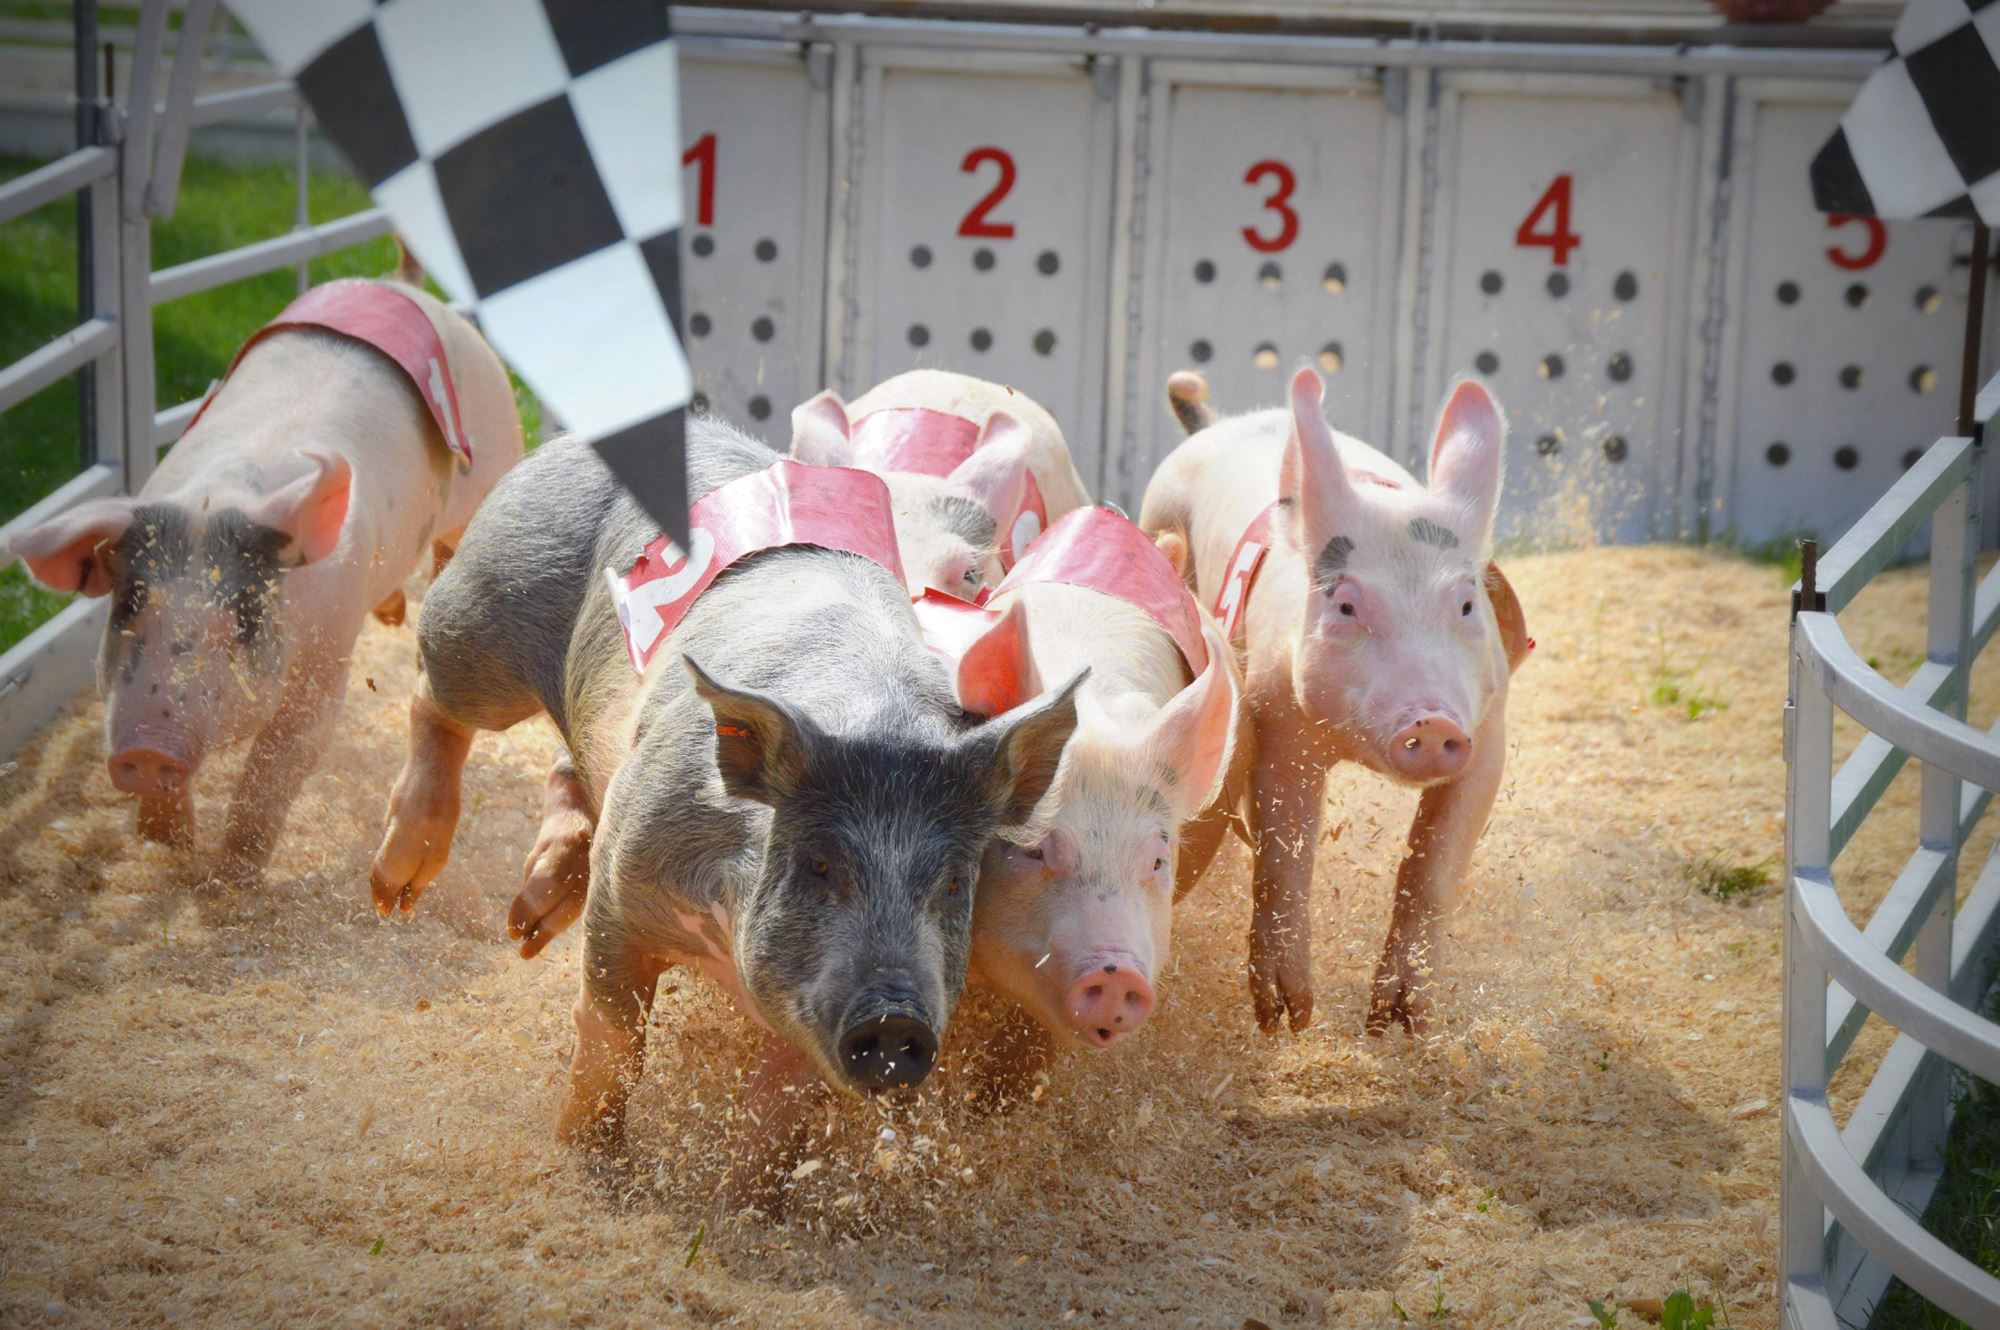 Pigs race at the Williamson County Expo Center in Taylor, TX